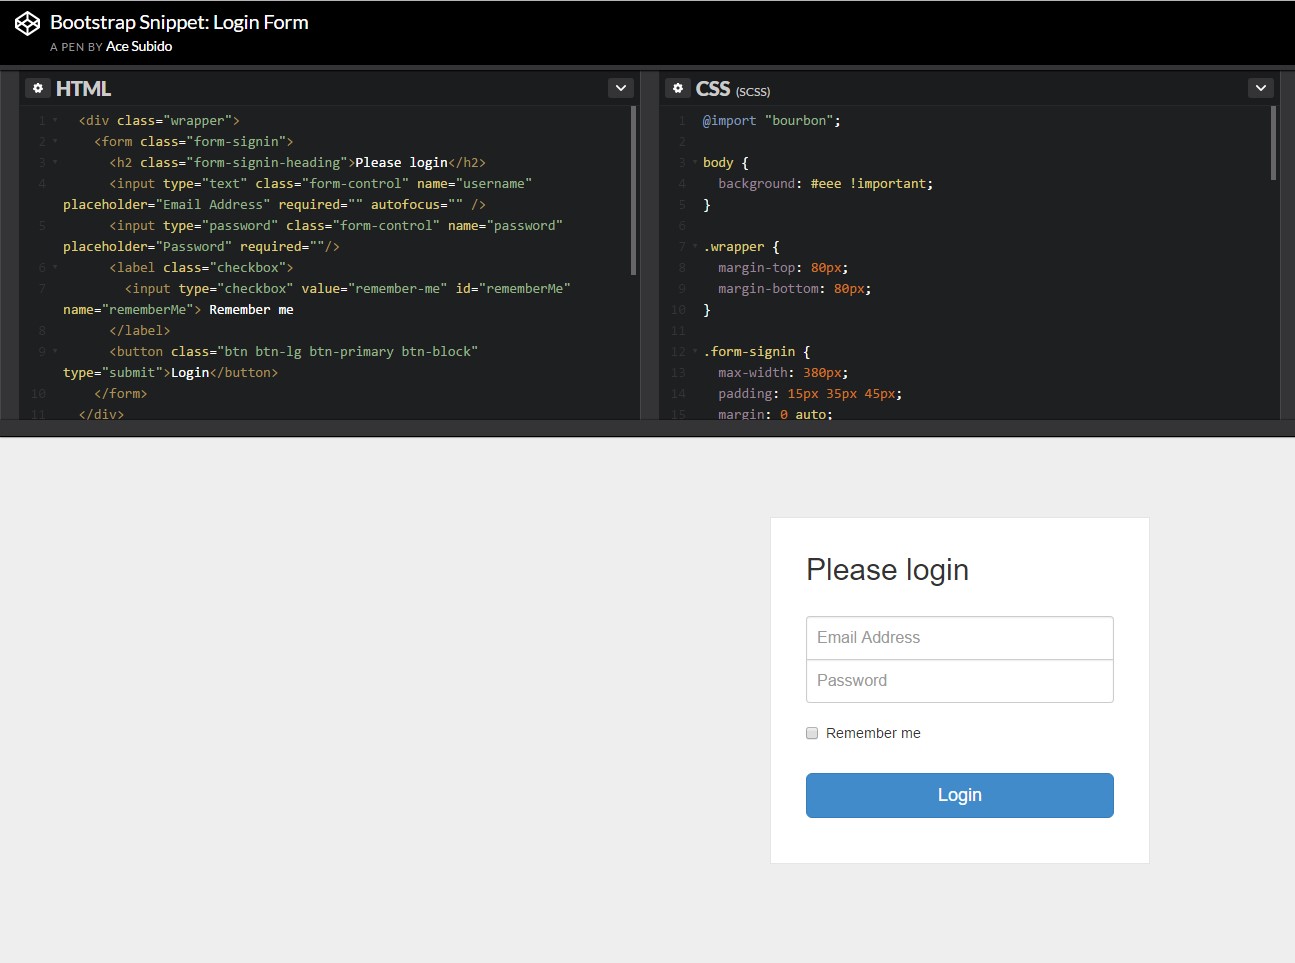  Other example of Bootstrap Login Form